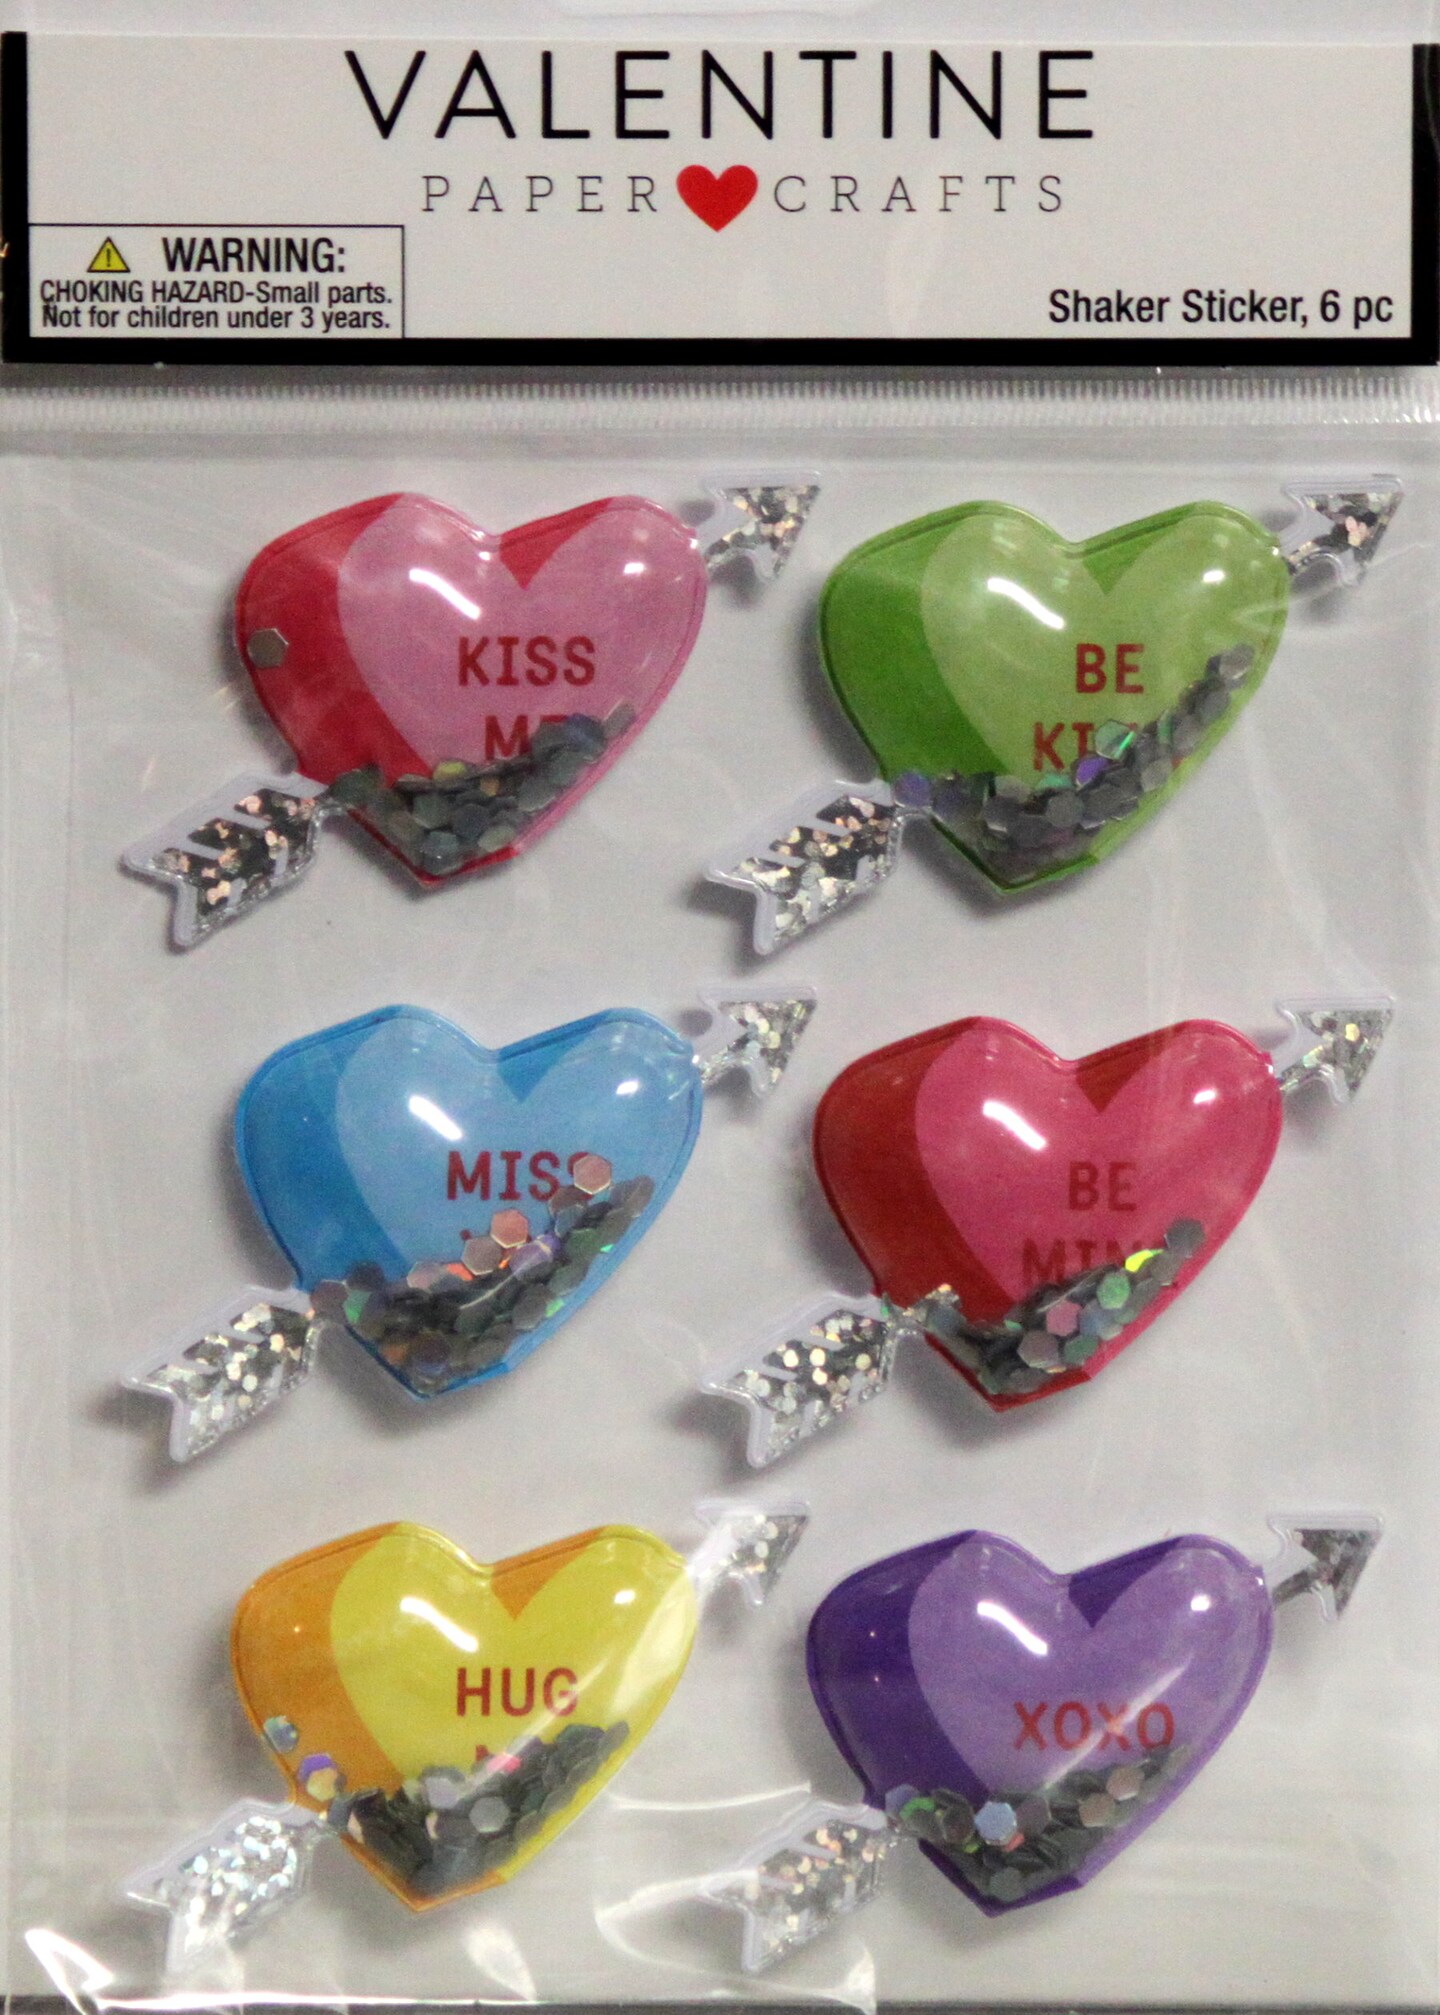 Paper Crafts Valentine Arrow Hearts Dimensional Shaker Stickers